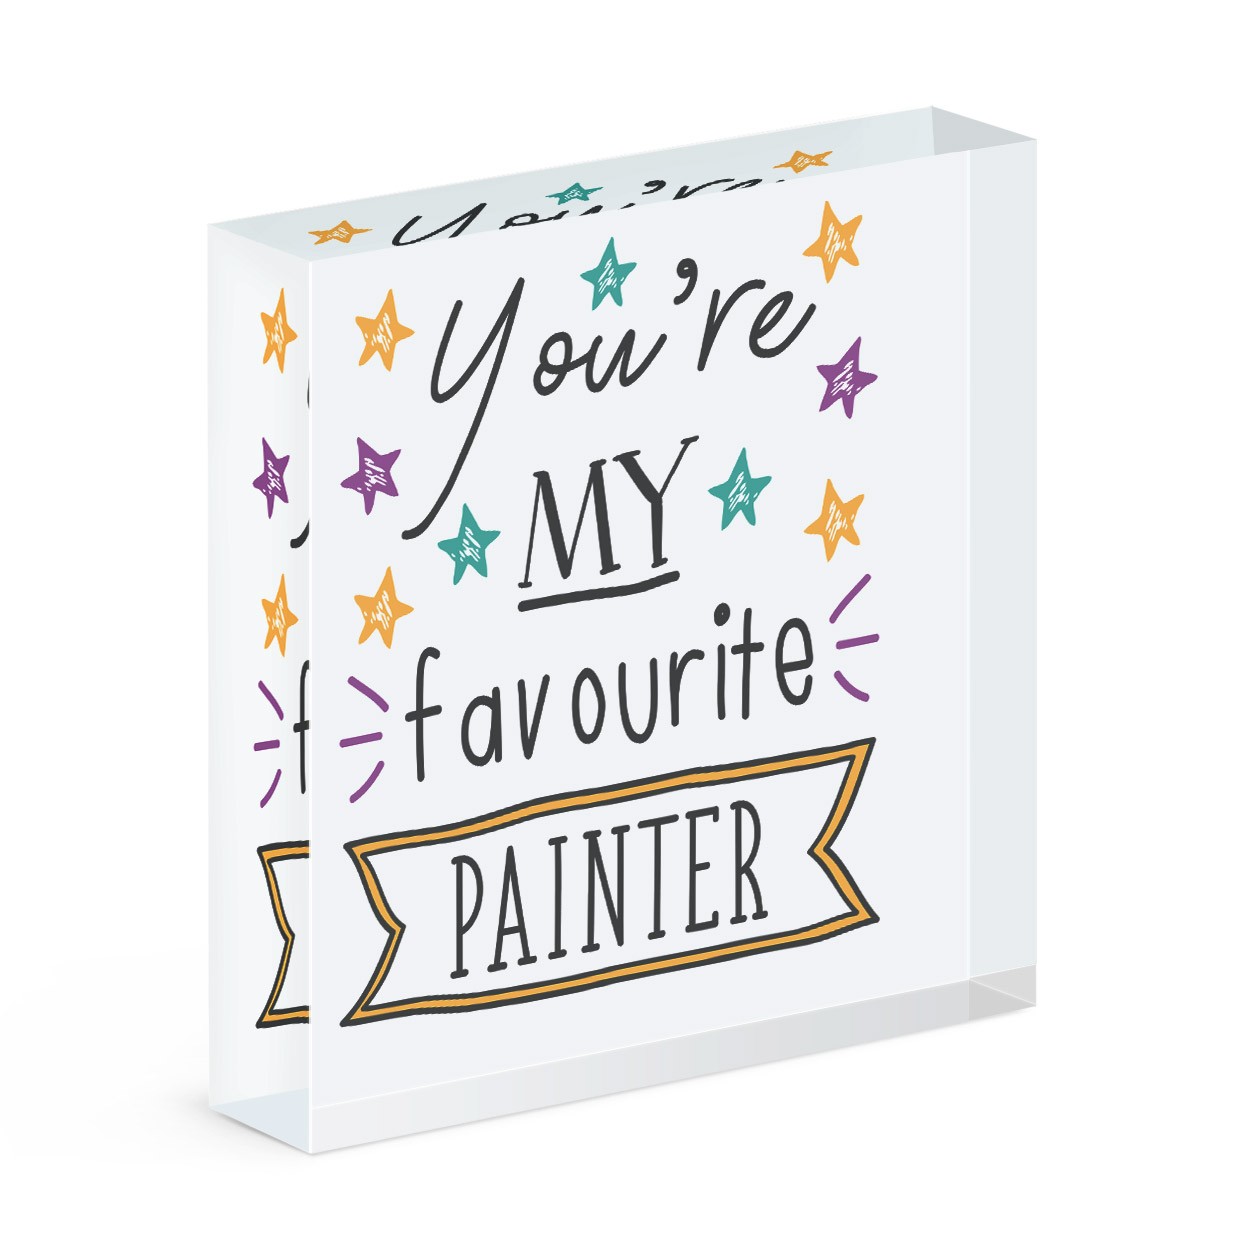 You're My Favourite Painter Acrylic Block